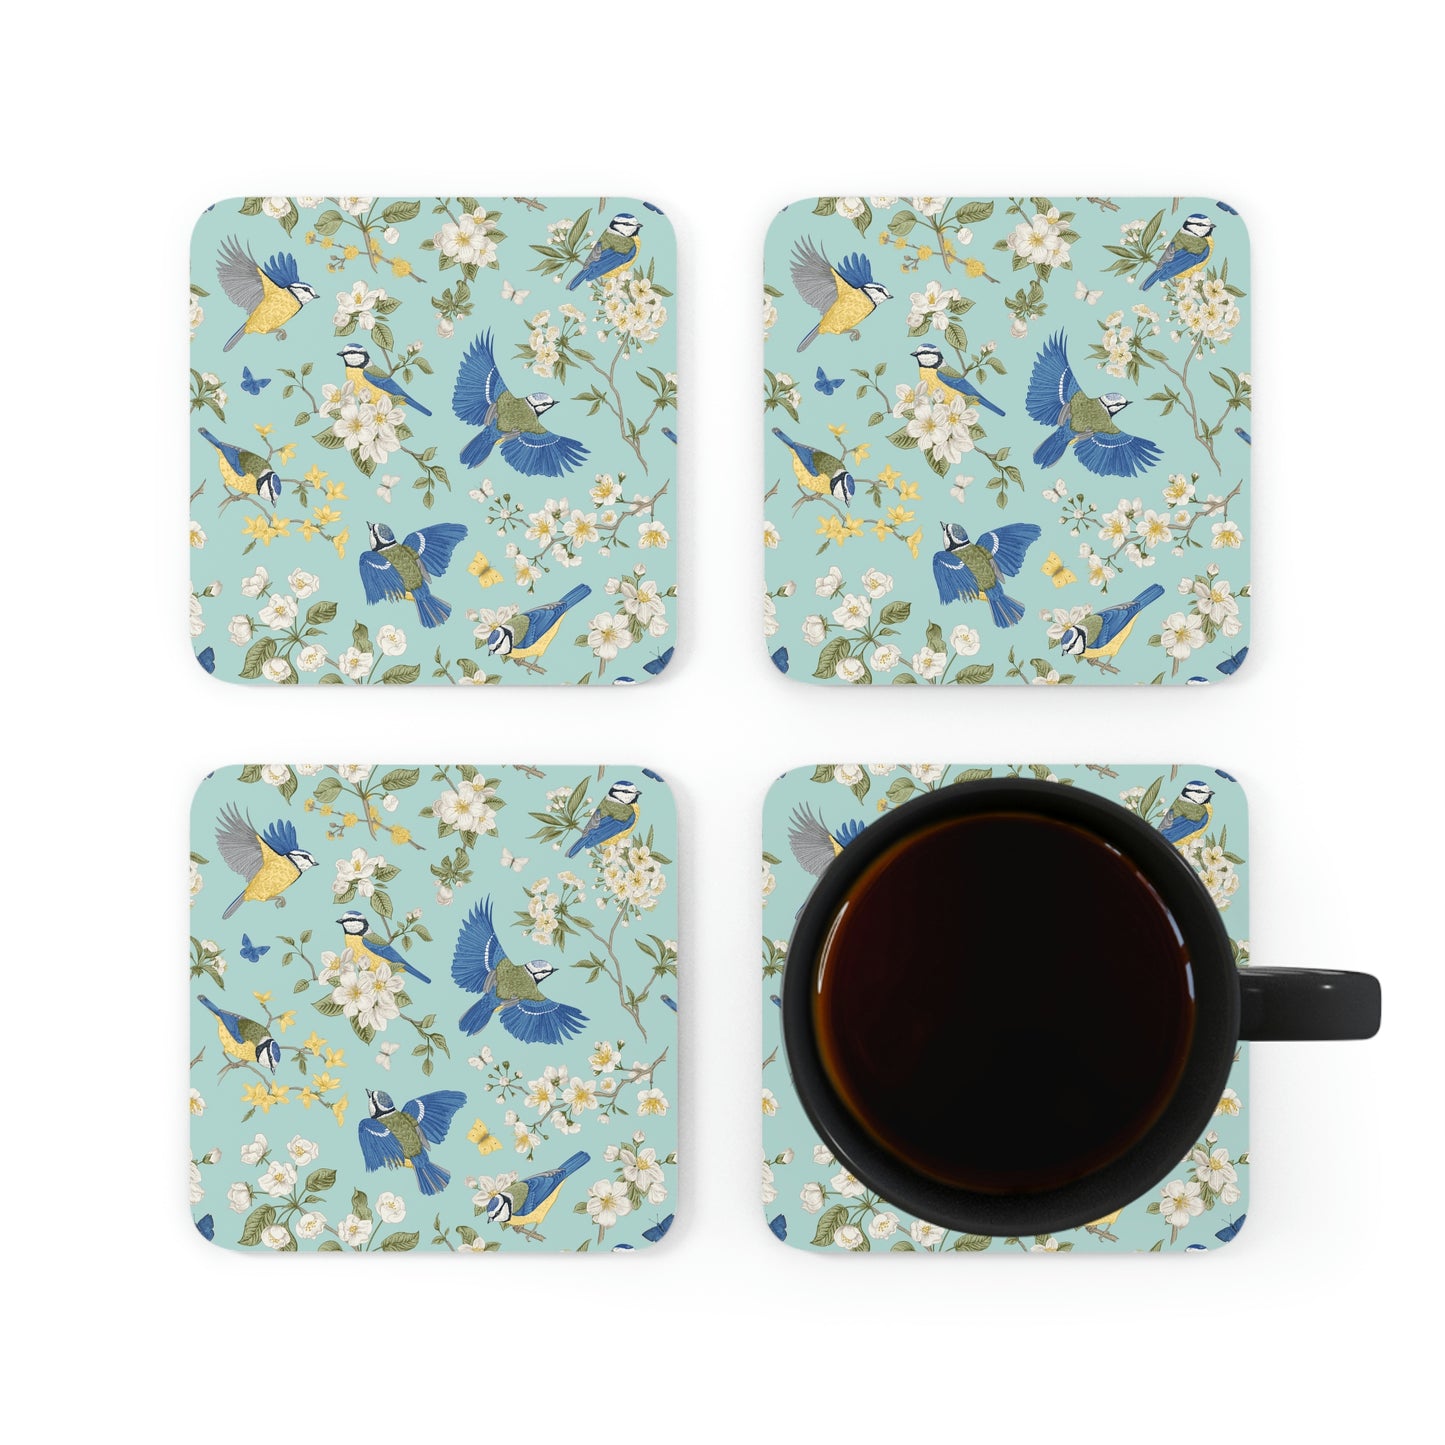 Chinoiserie Birds and Flowers Corkwood Coaster Set